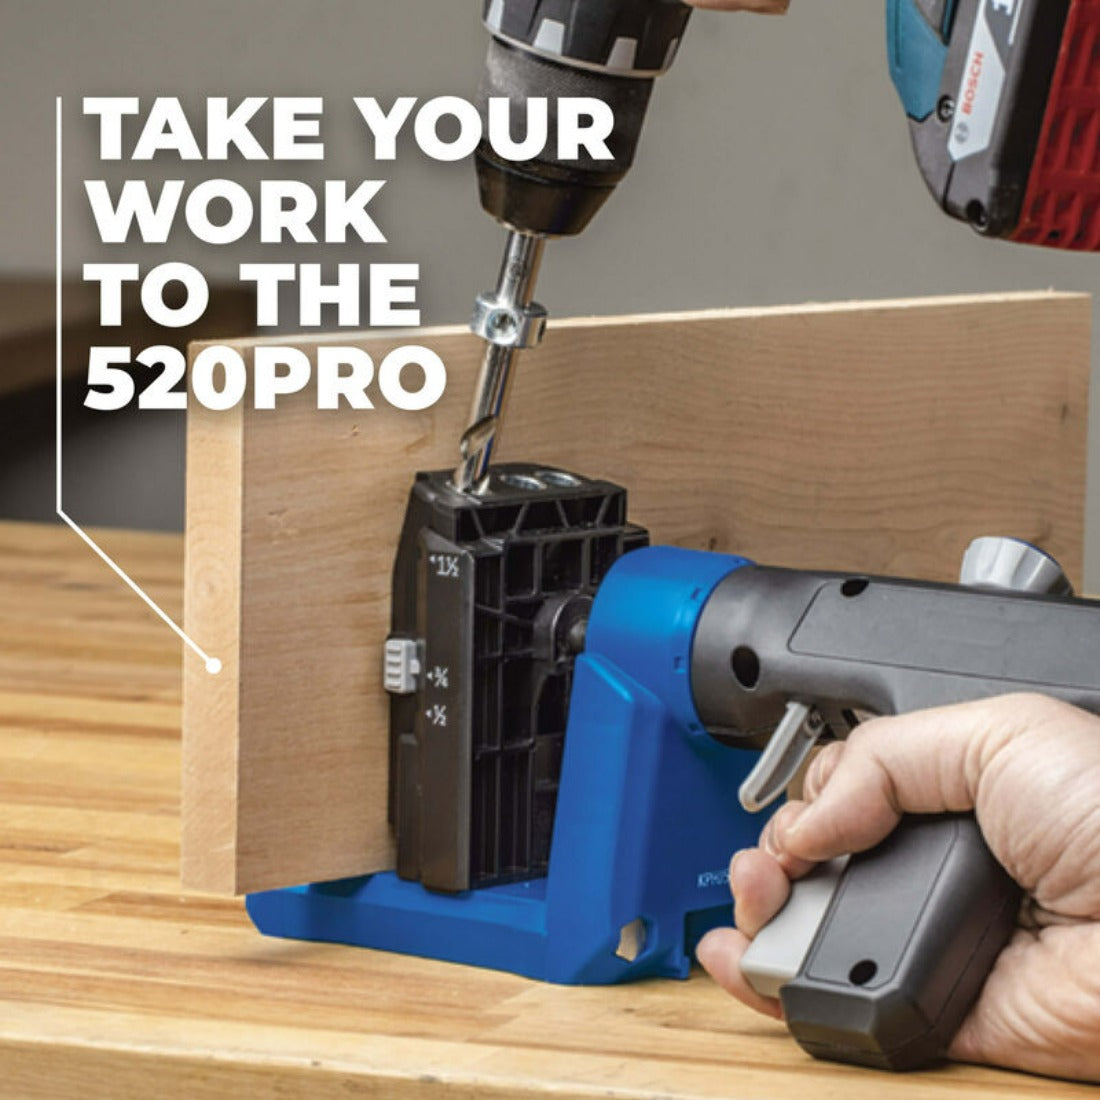 another image showing the kreg 520pro with a plank of timber in the jig being drilled for pocket screws and caption reading "take your work to the 520pro"